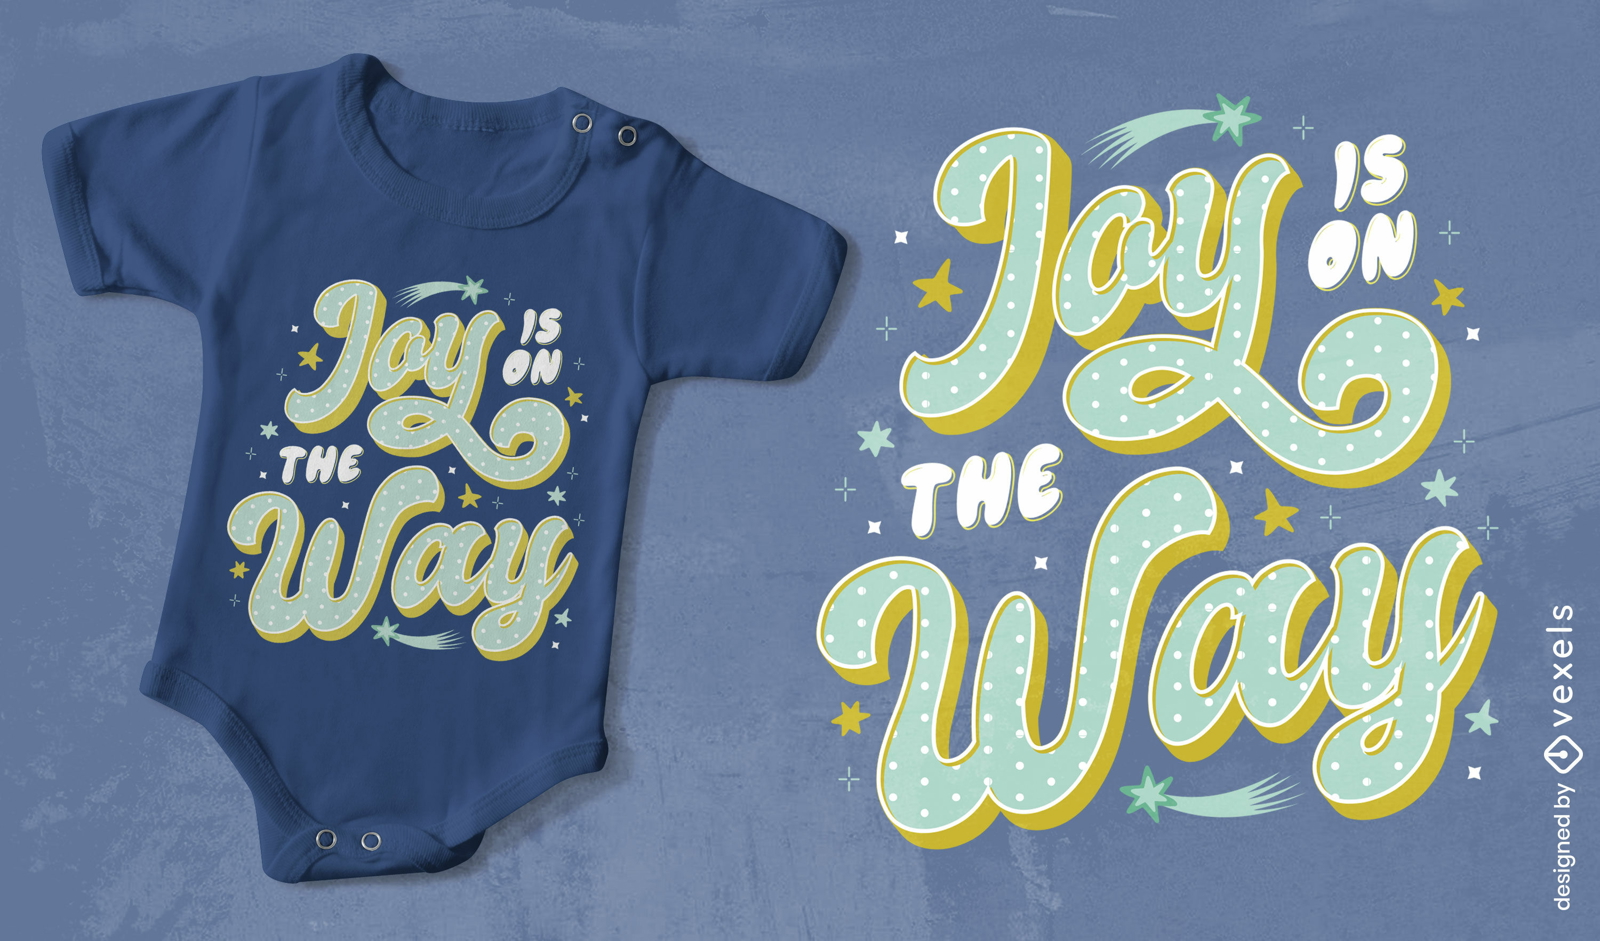 Joy is on the way baby announcement t-shirt design